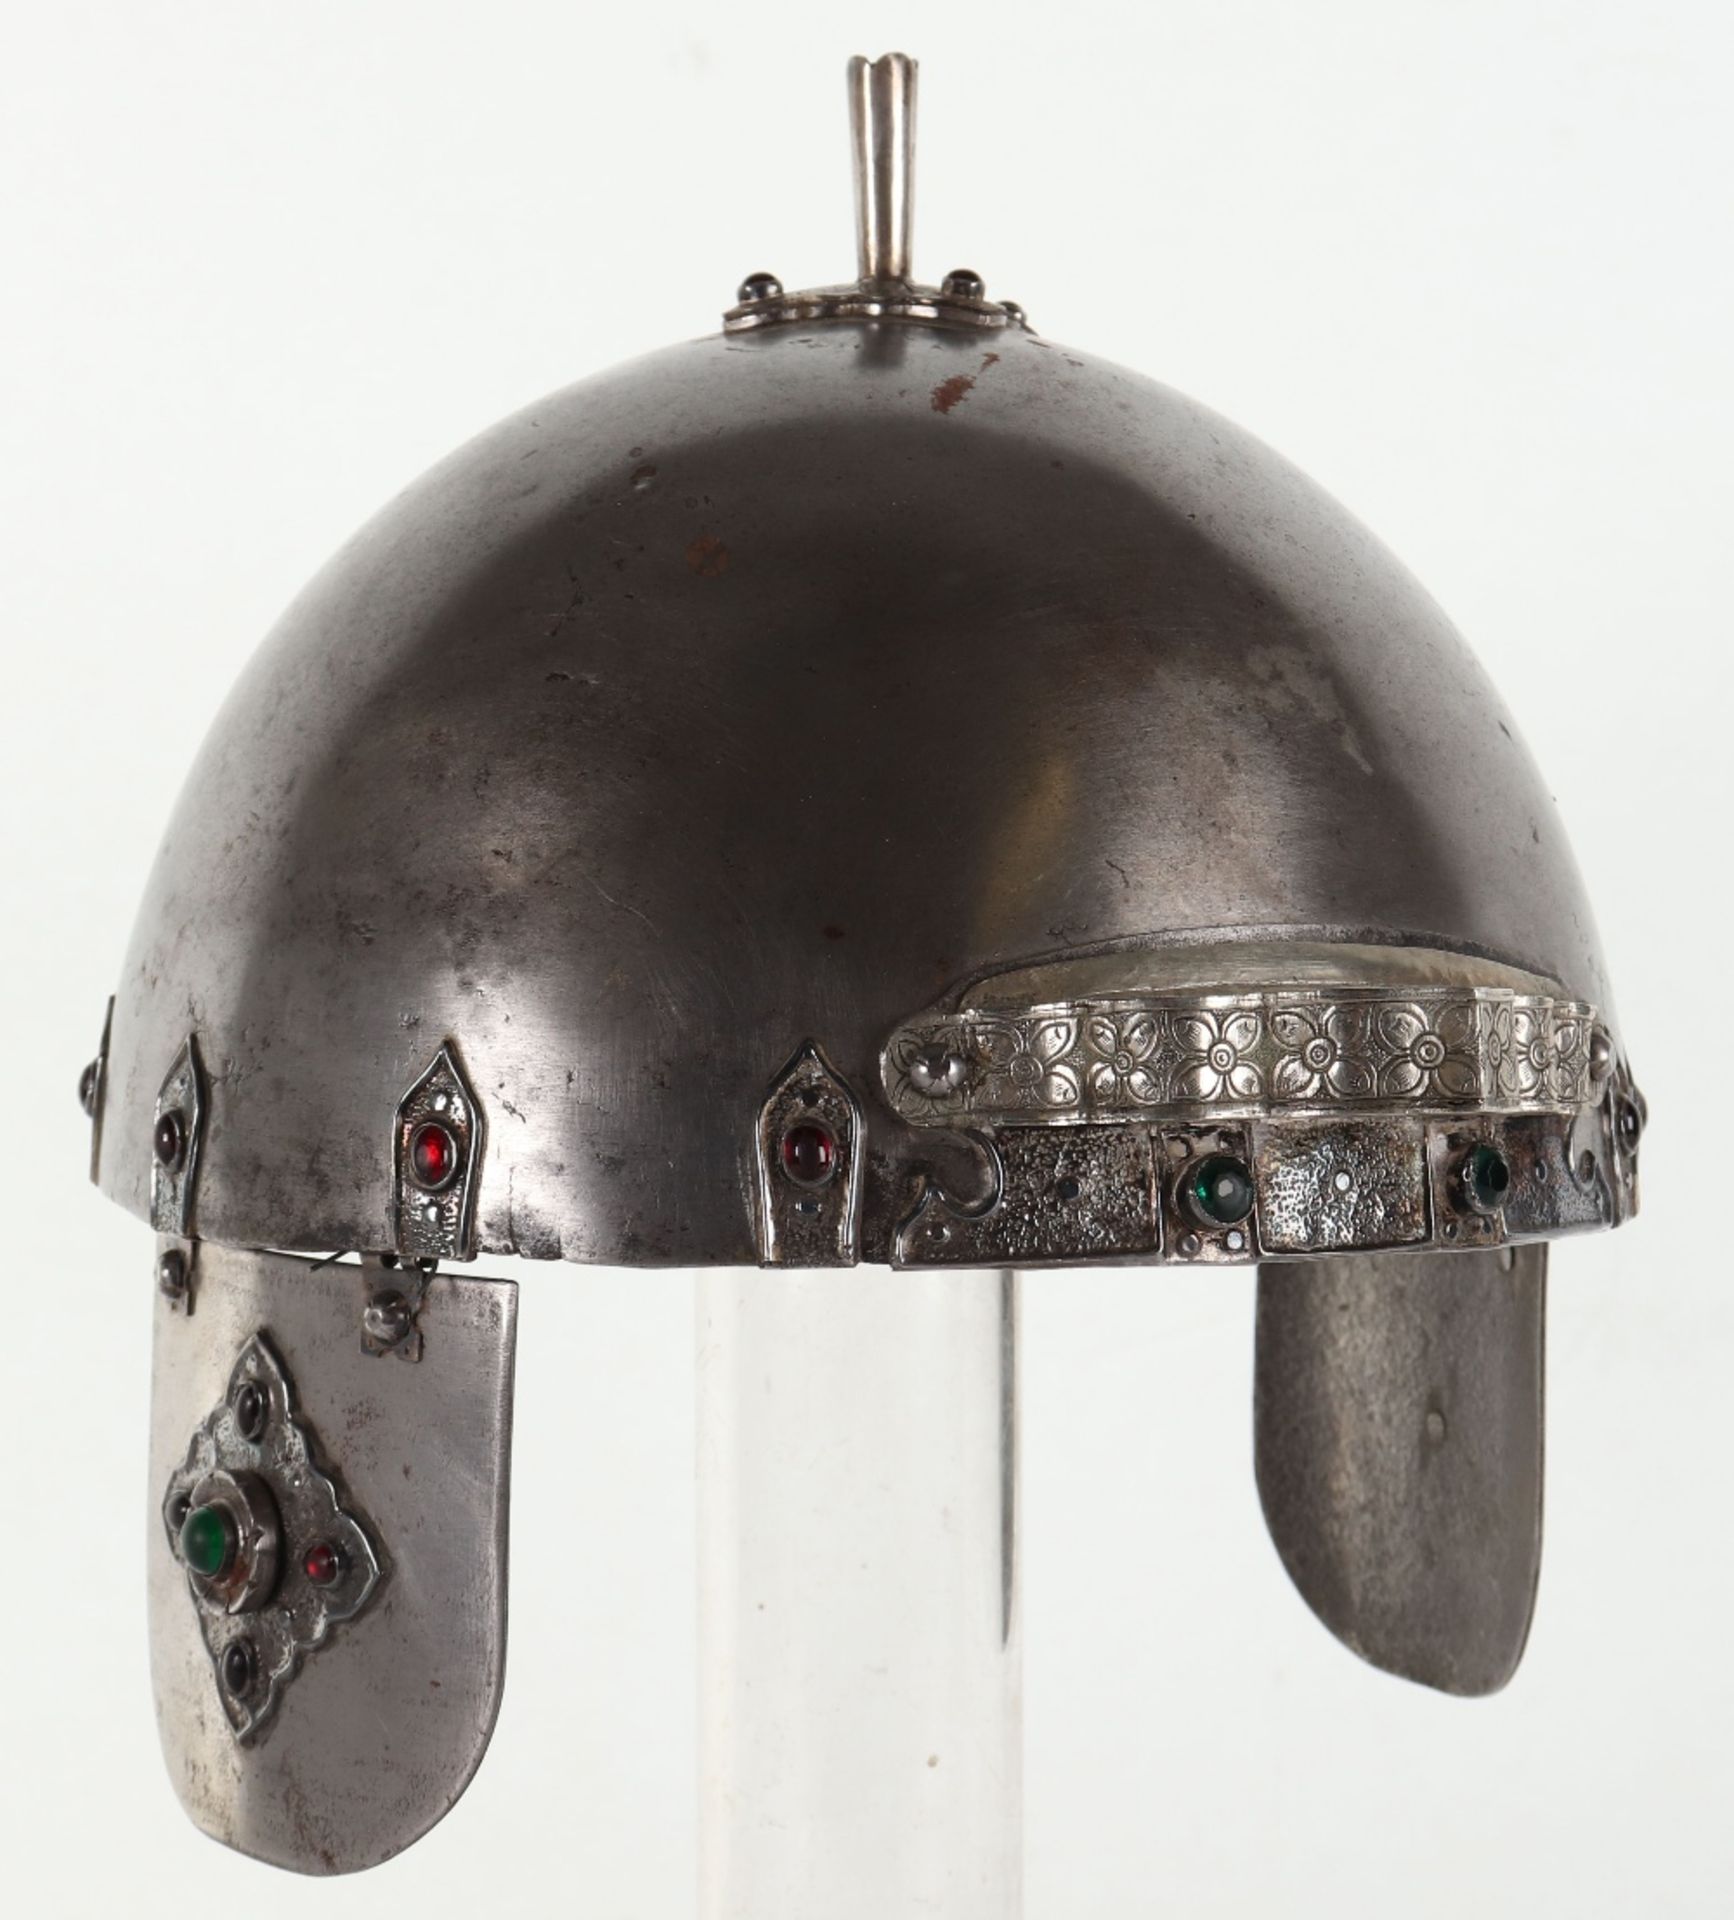 Bhutanese Helmet Possibly 18th or 19th Century - Image 11 of 15